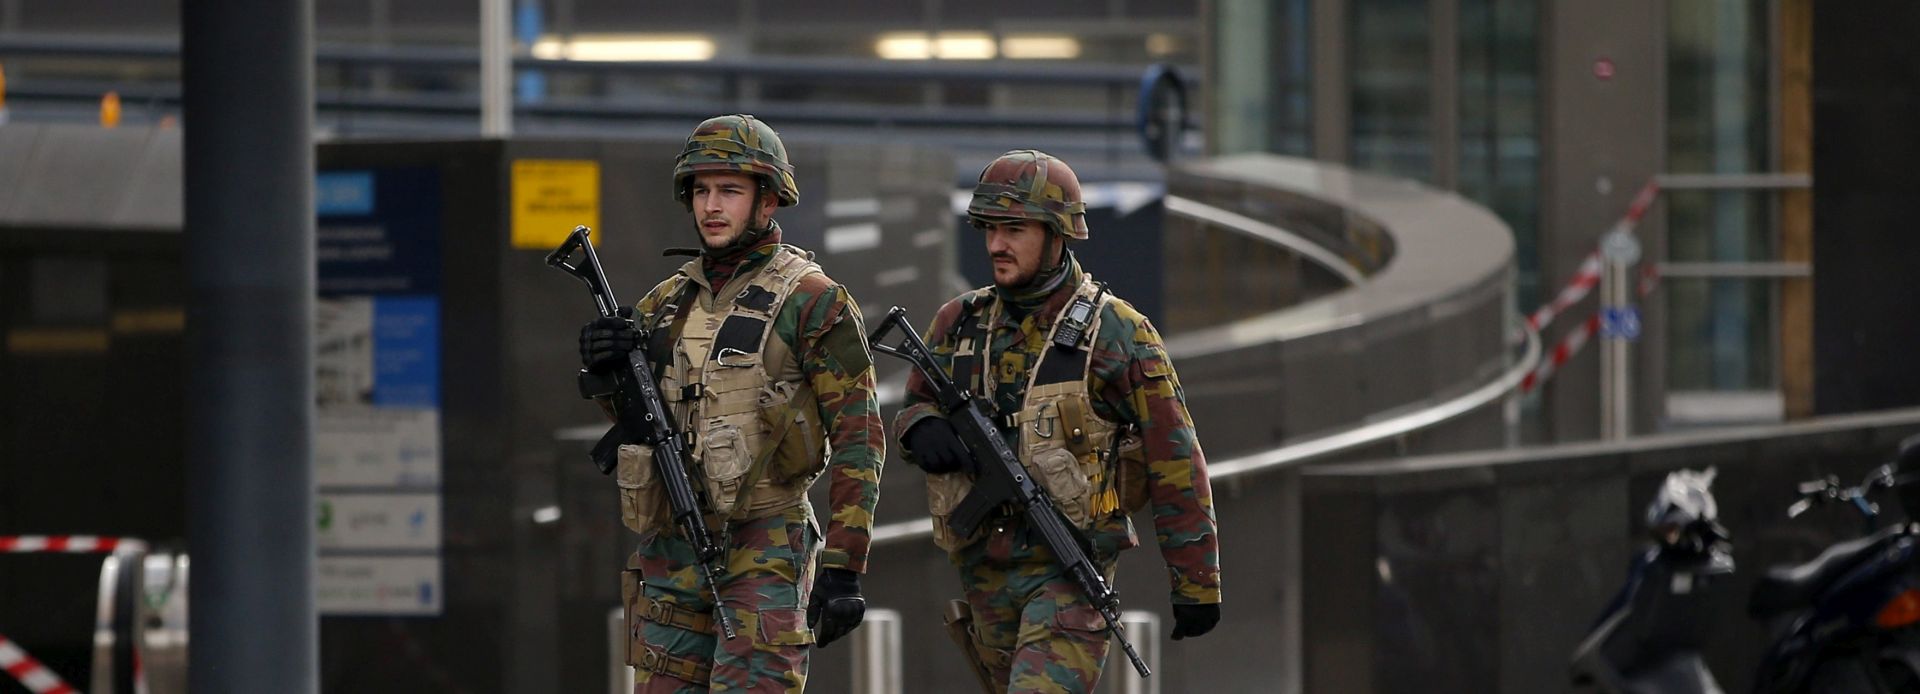 epa05225676 Members of the Belgium army patrol near the European Commission, after an explosion at Maelbeek Metro station, Brussels, Belgium, 22 March 2016. Security services are on high alert following the explosions in the departure hall of Zaventem Airport and on the metro system in Brussels, Belgium, where many people have died or been injured.  EPA/YOAN VALAT